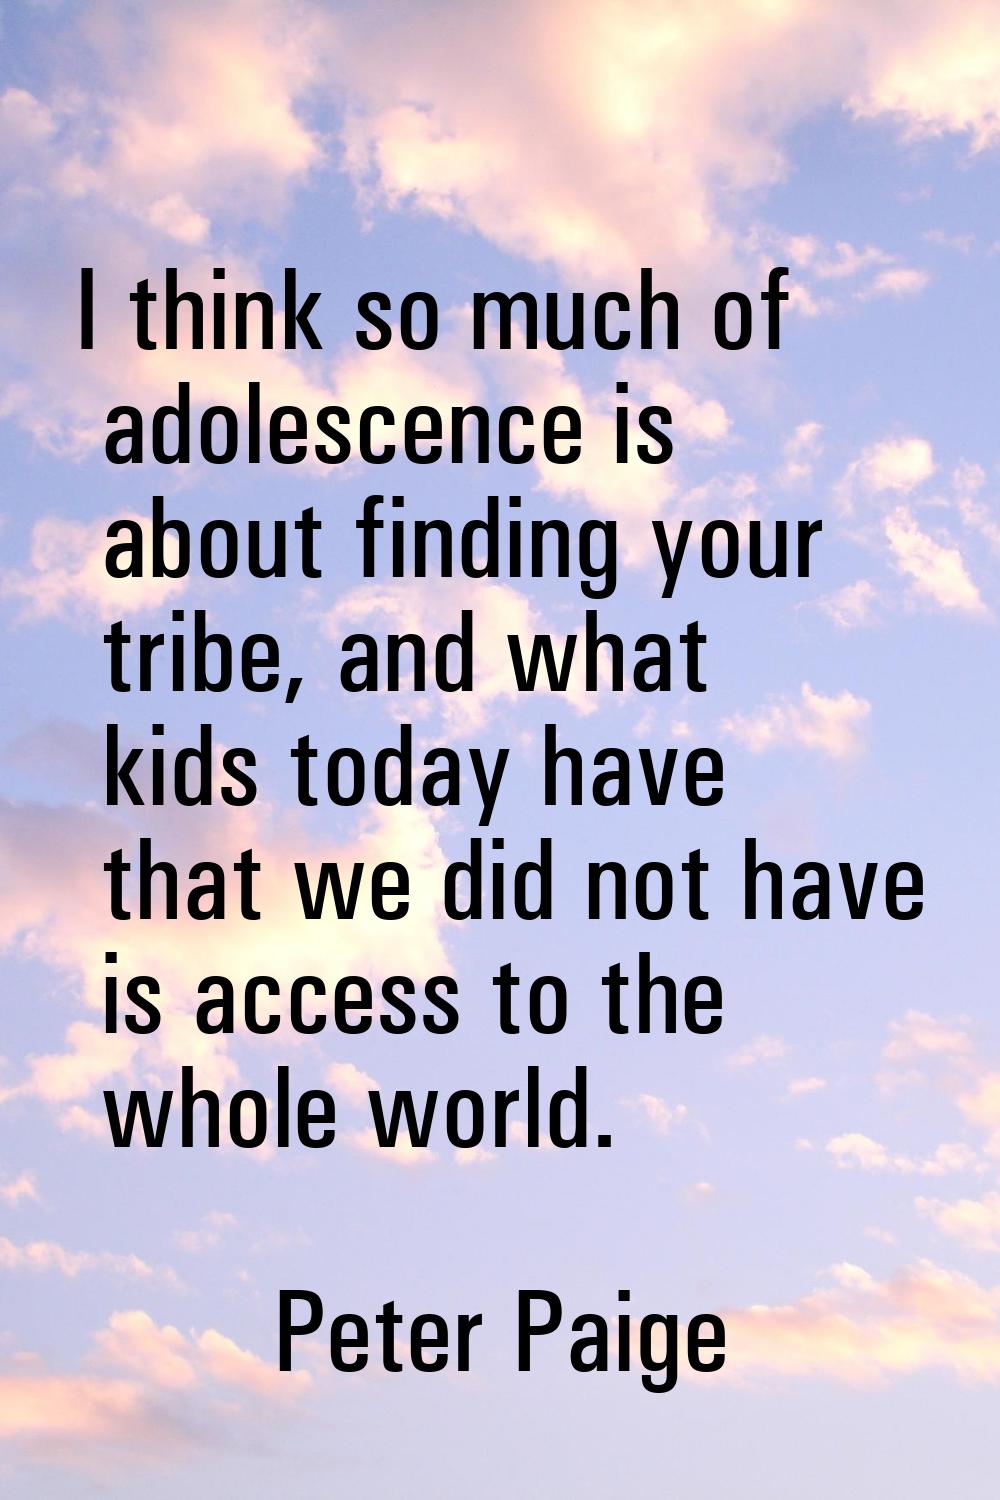 I think so much of adolescence is about finding your tribe, and what kids today have that we did no